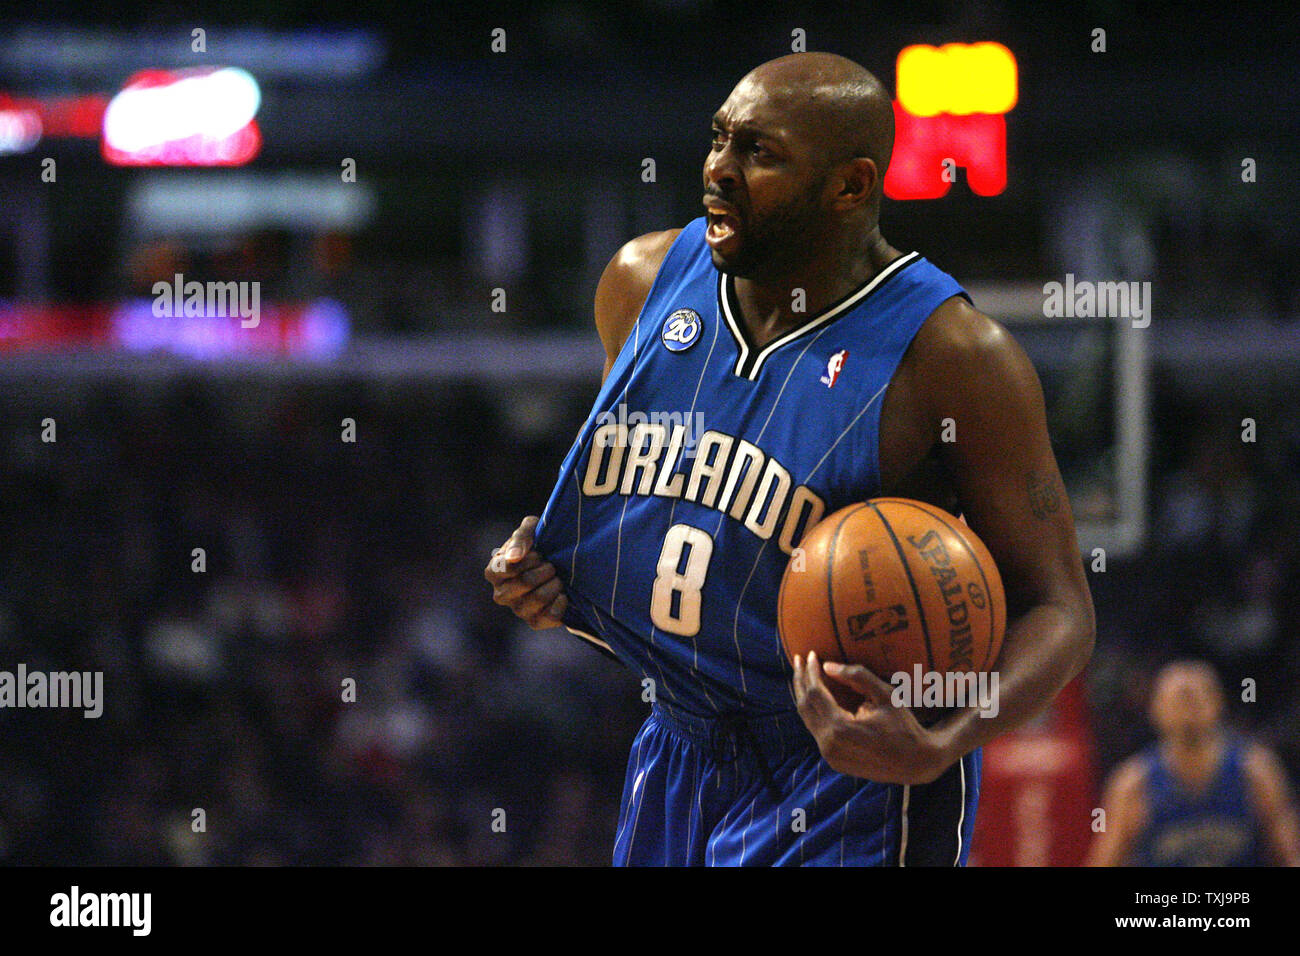 Orlando Magic guard Anthony Johnson complains to the referee during the second quarter against the Chicago Bulls at the United Center in Chicago on February 24, 2009. The Bulls won 120-102. (UPI Photo/Brian Kersey) Stock Photo